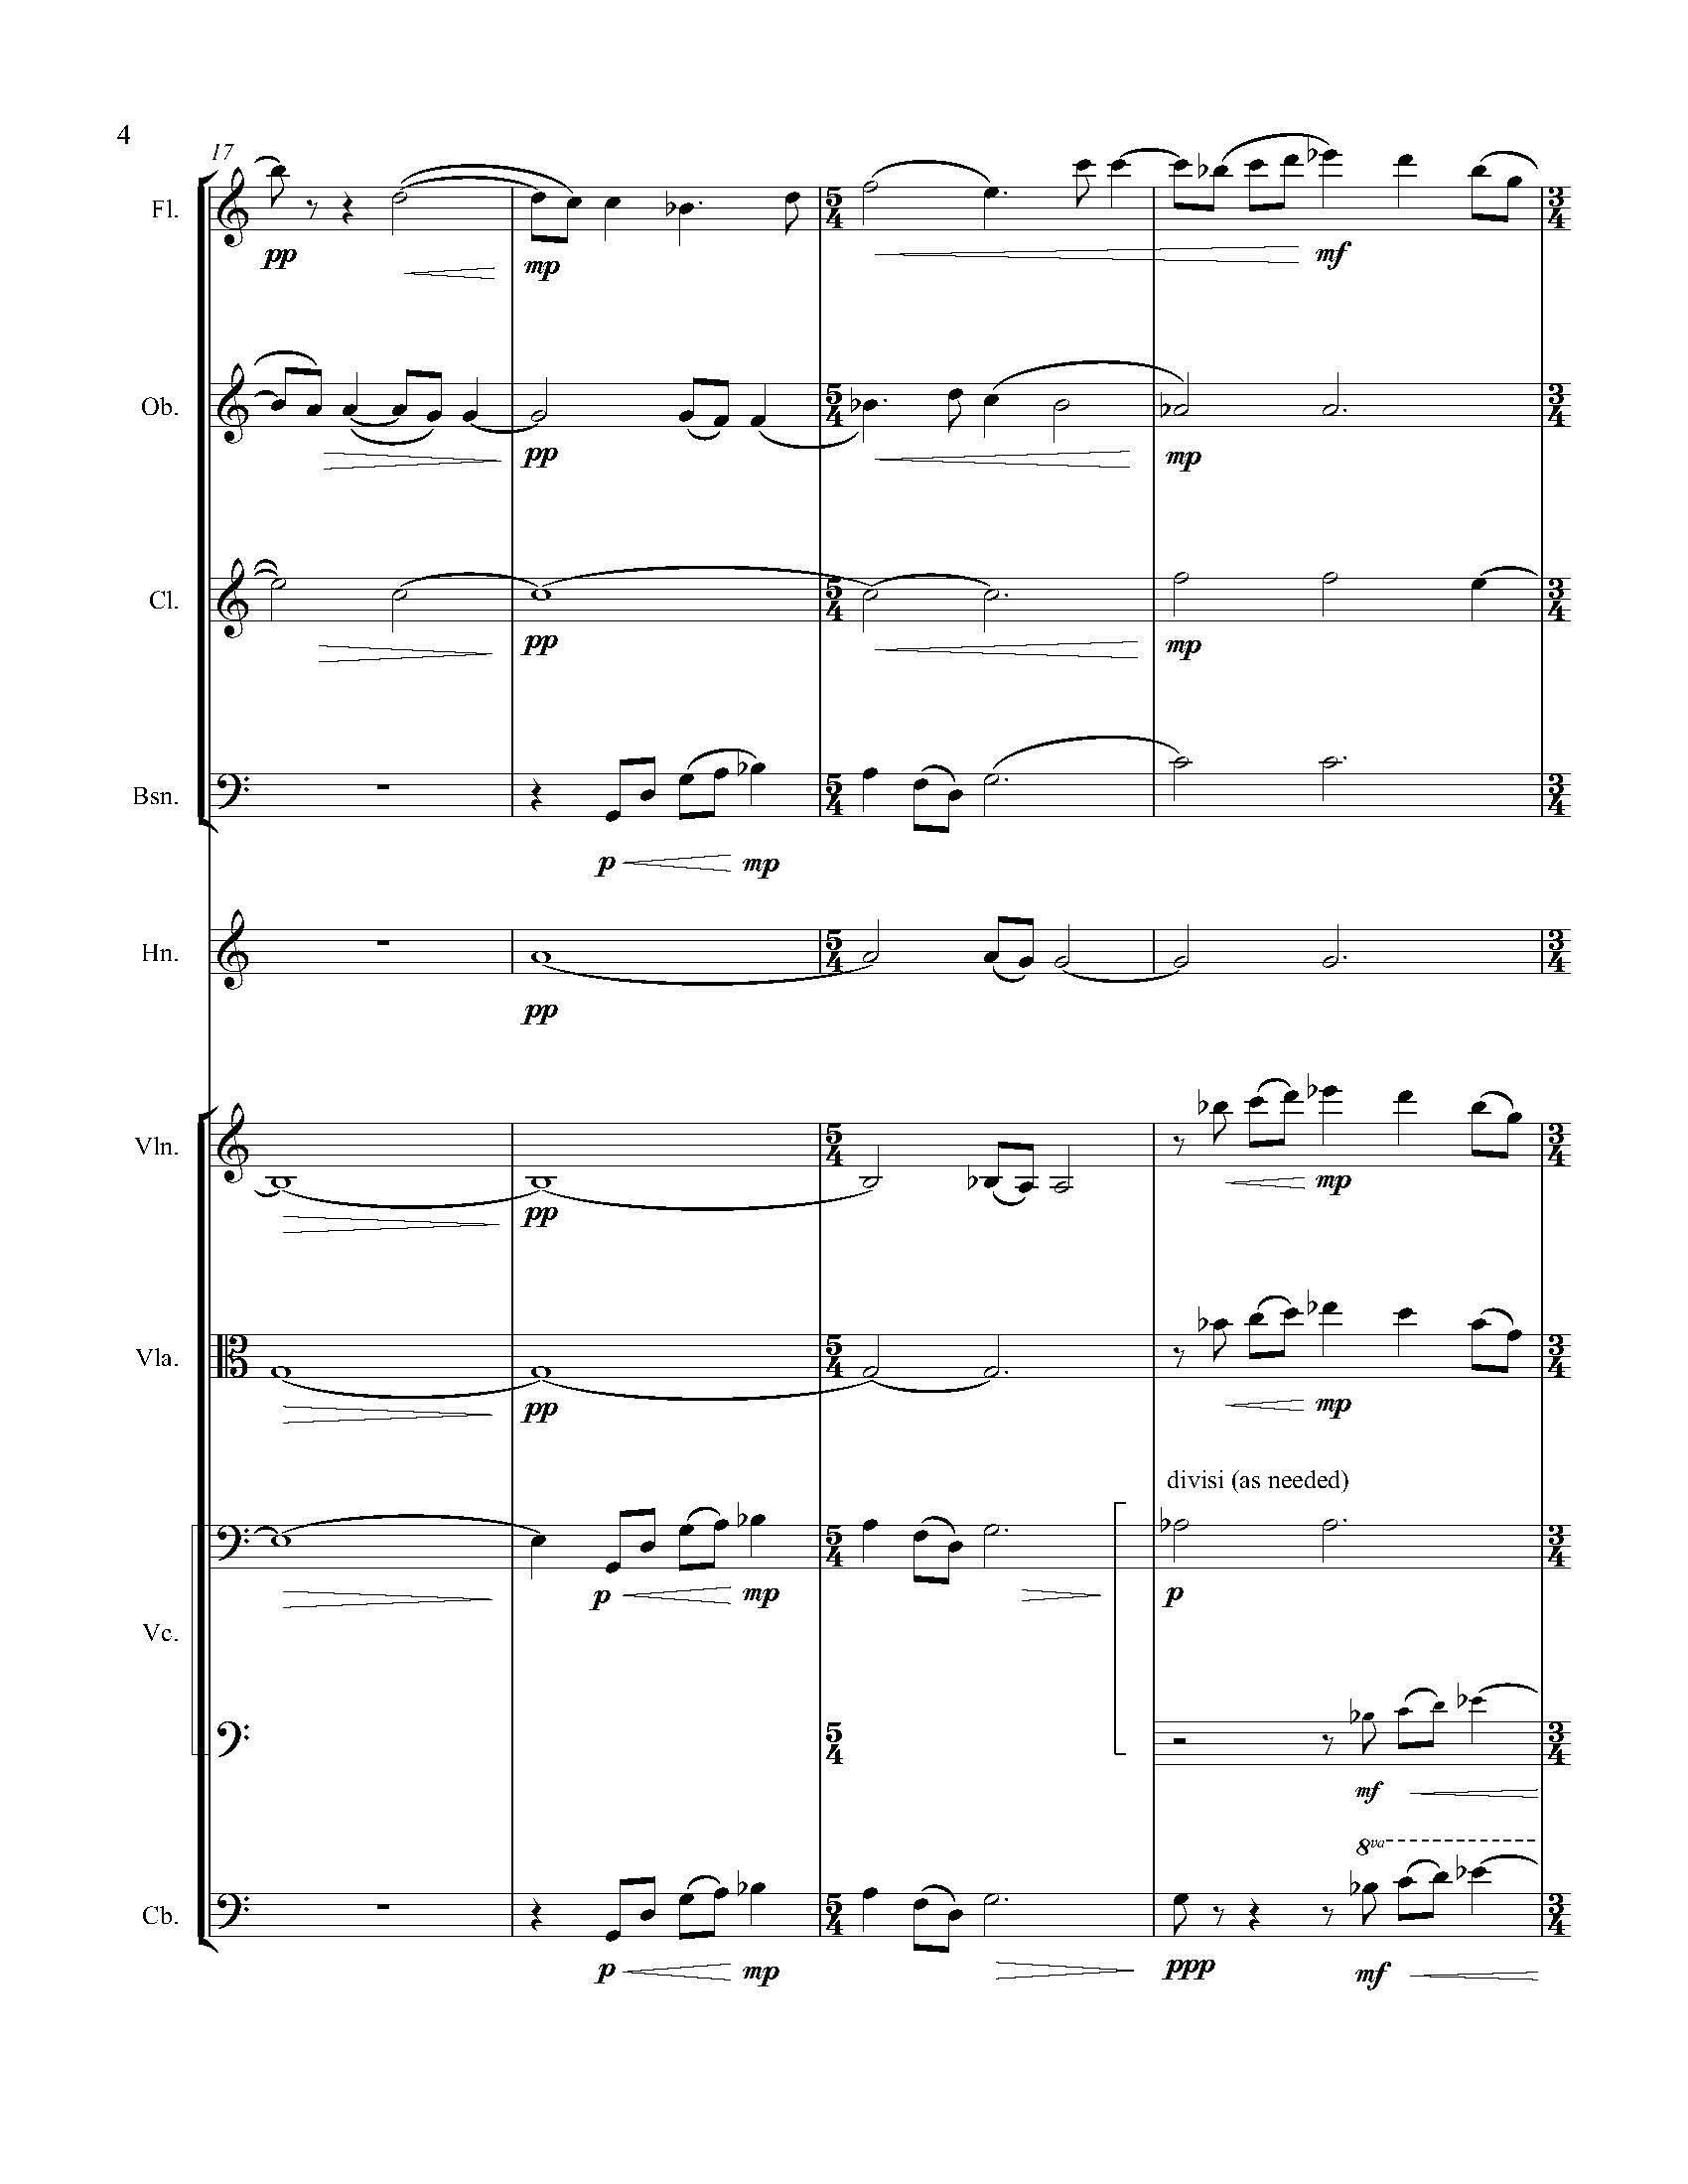 In Search of a Bird - Complete Score_Page_10.jpg